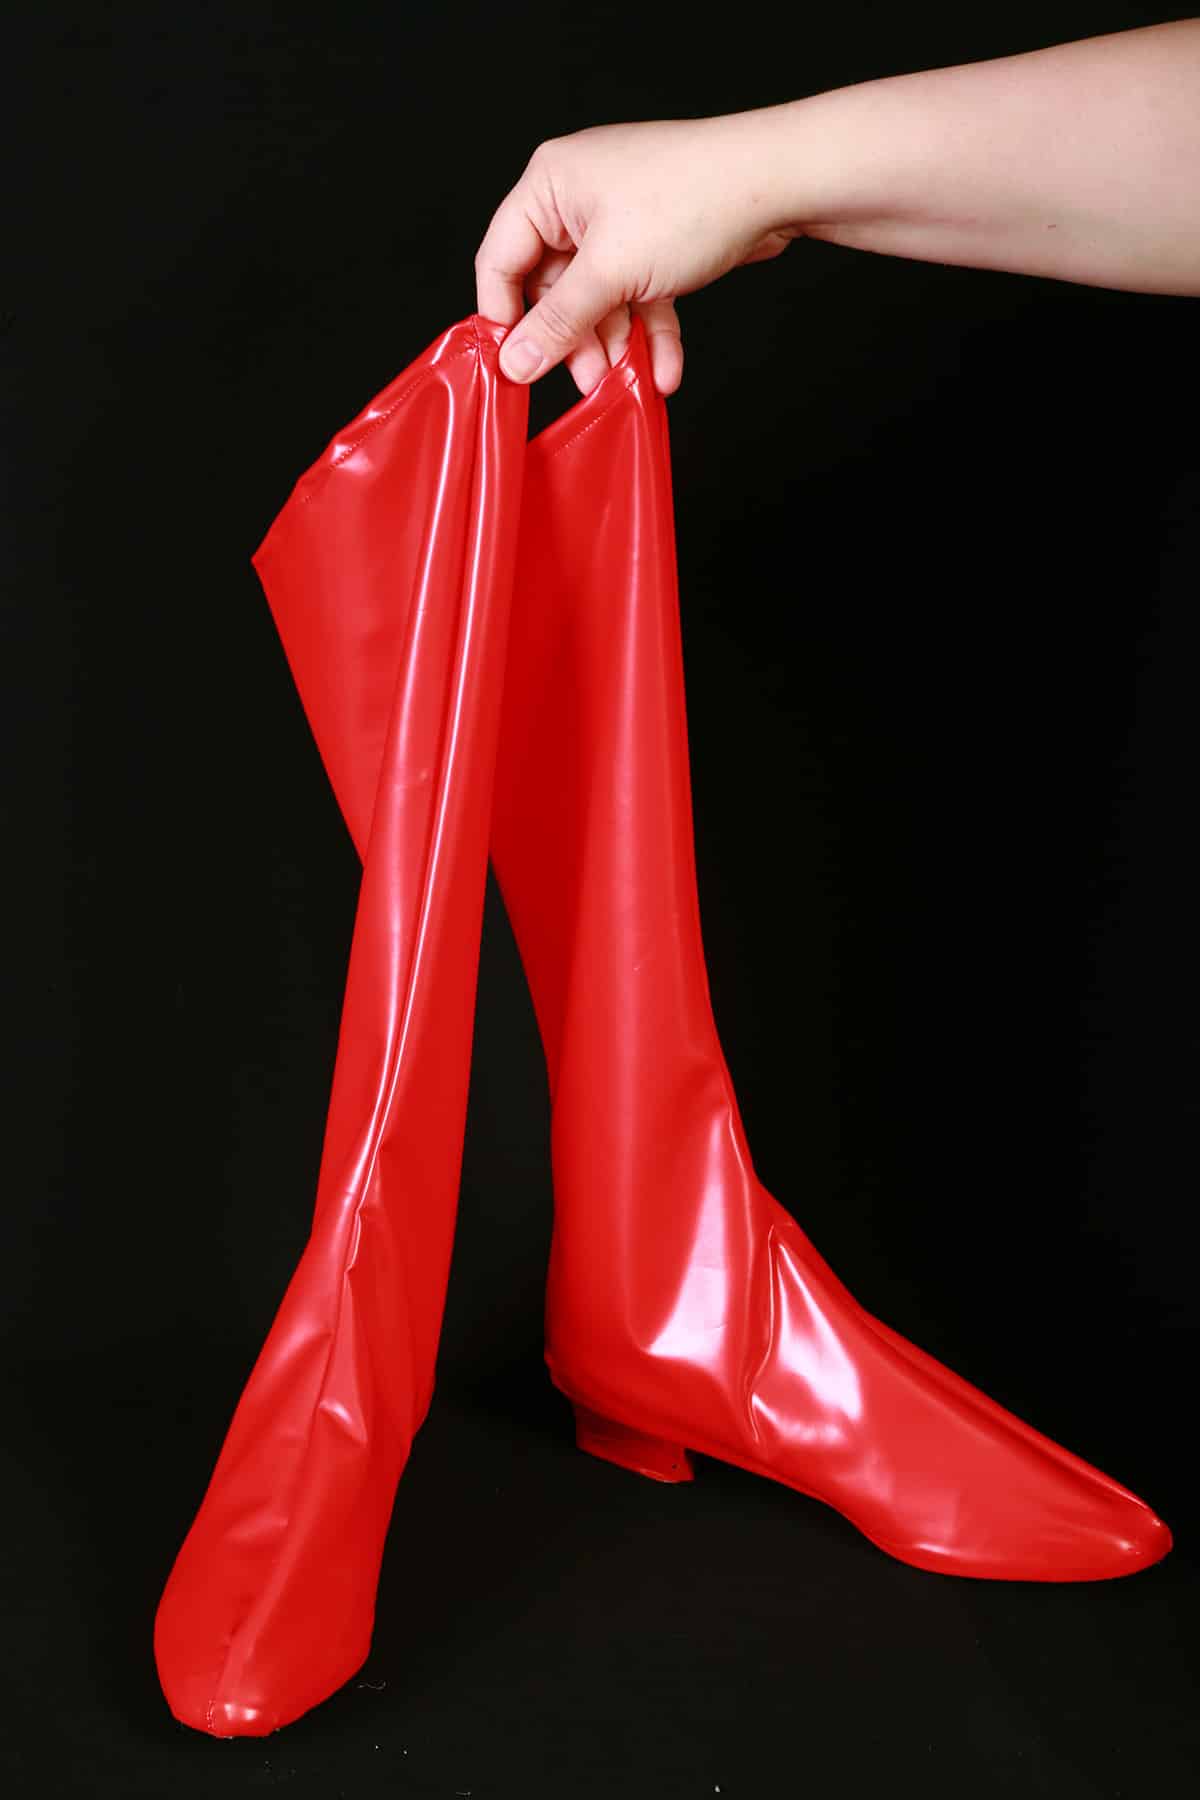 A hand holds up a shiny pair of bright red spandex boot covers.